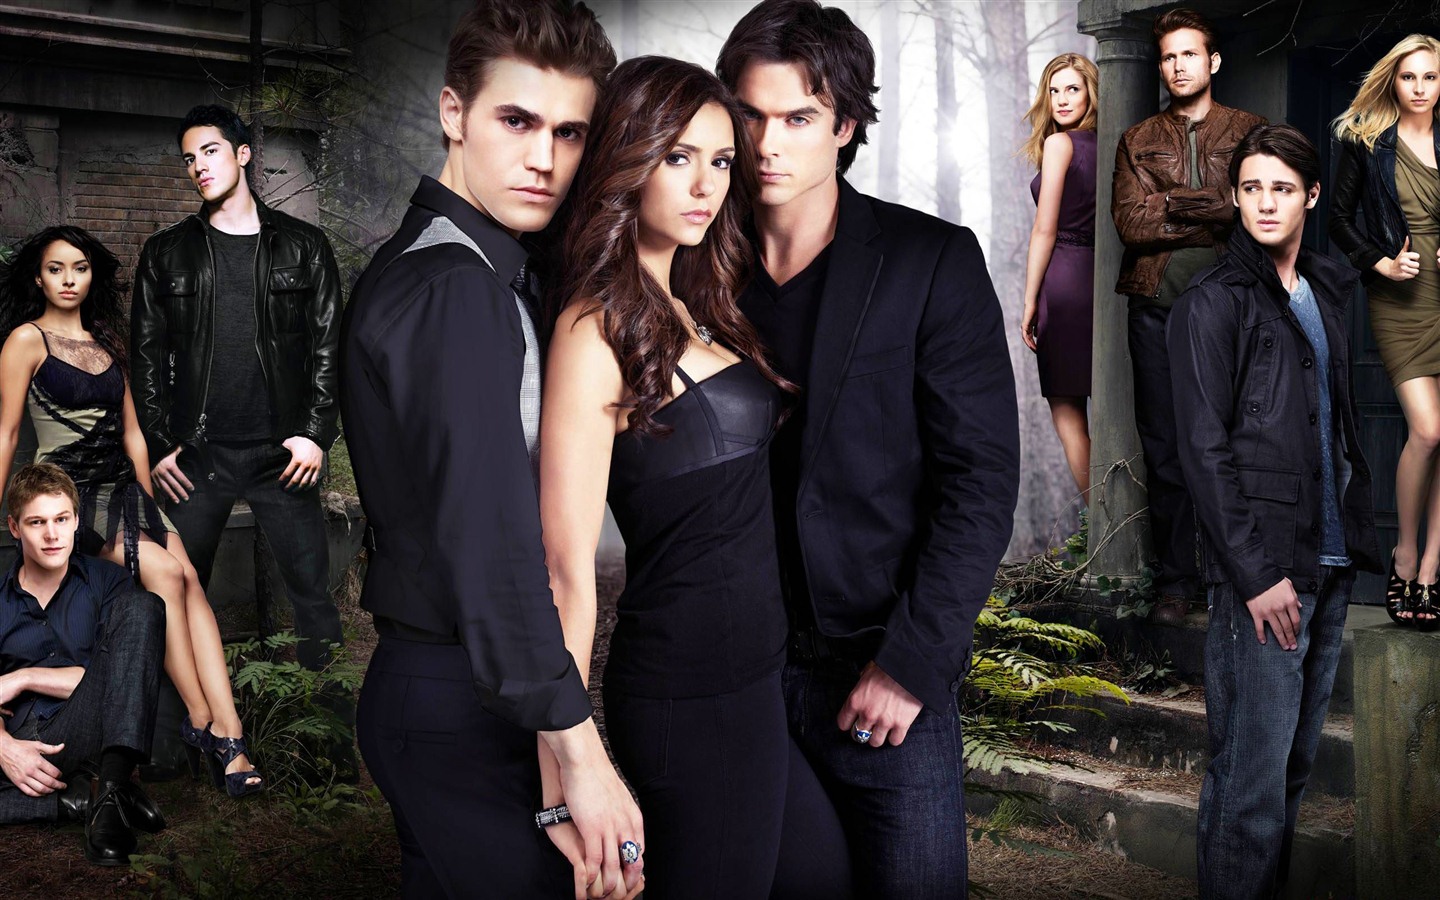 The Vampire Diaries HD Wallpapers #12 - 1440x900